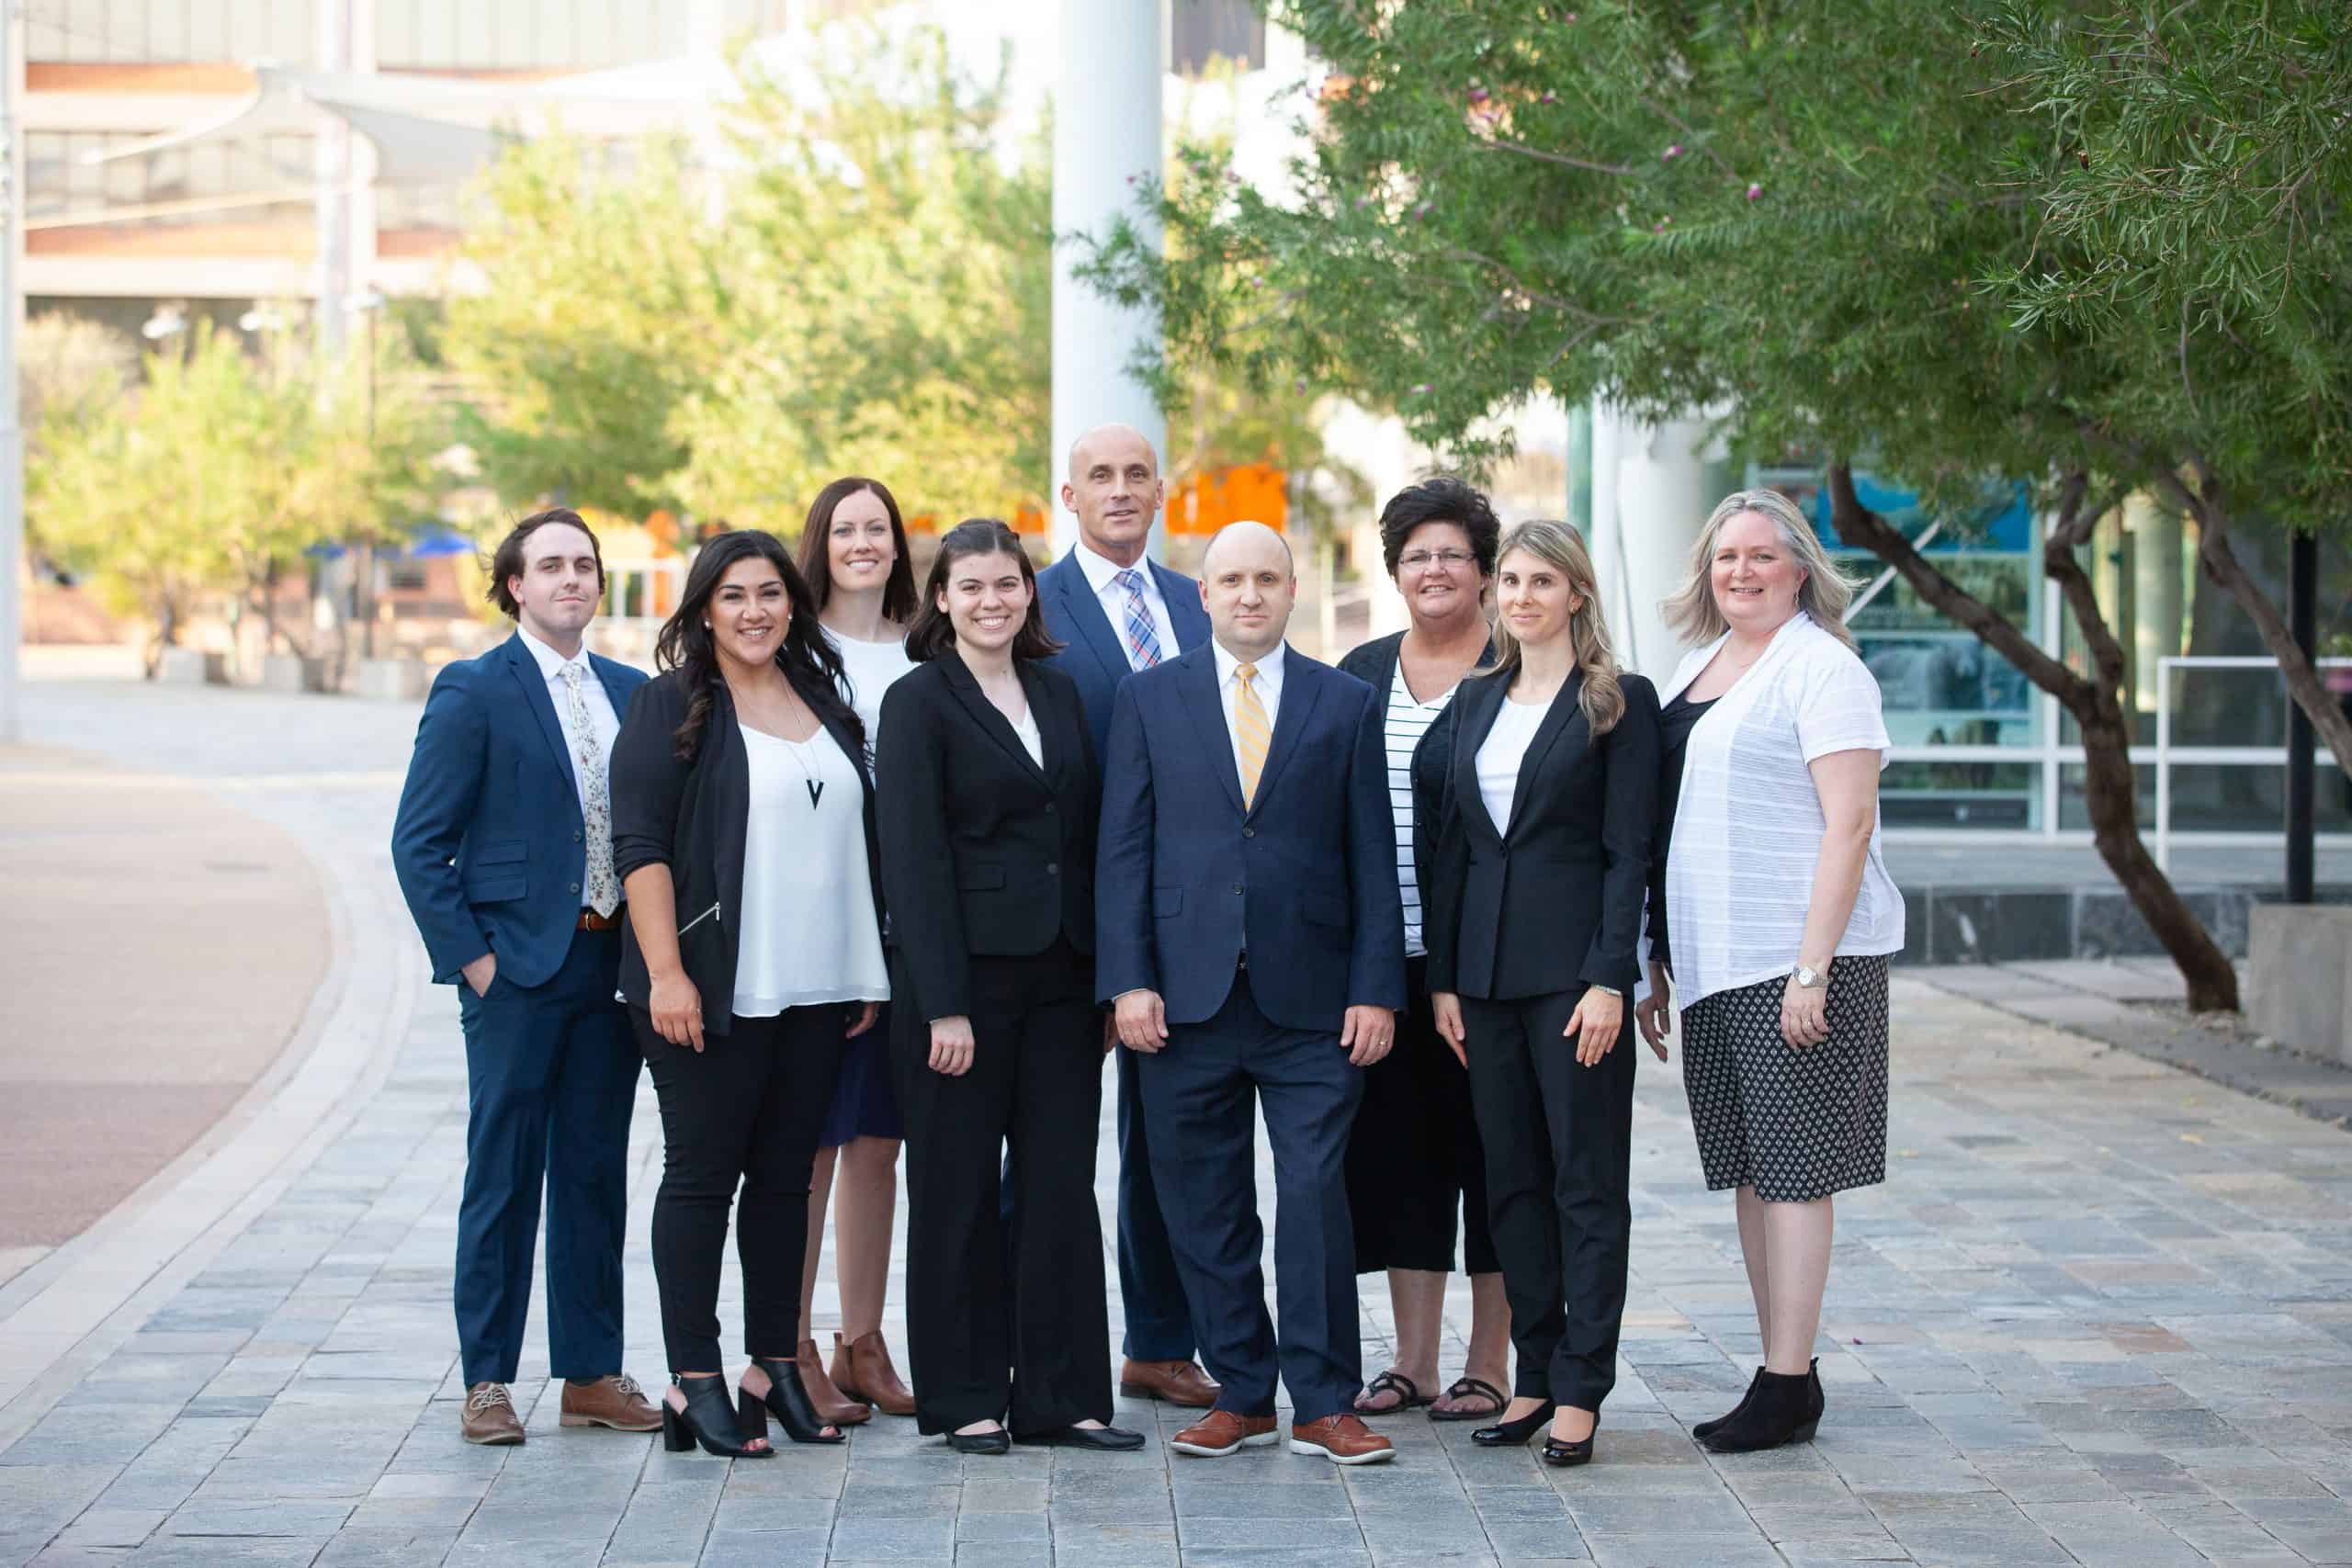 Jensen Family Law in Mesa AZ Divorce Lawyer and Family Law Attorney, an Established Female Divorce Attorney, Simplifies Clients’ Divorce Process